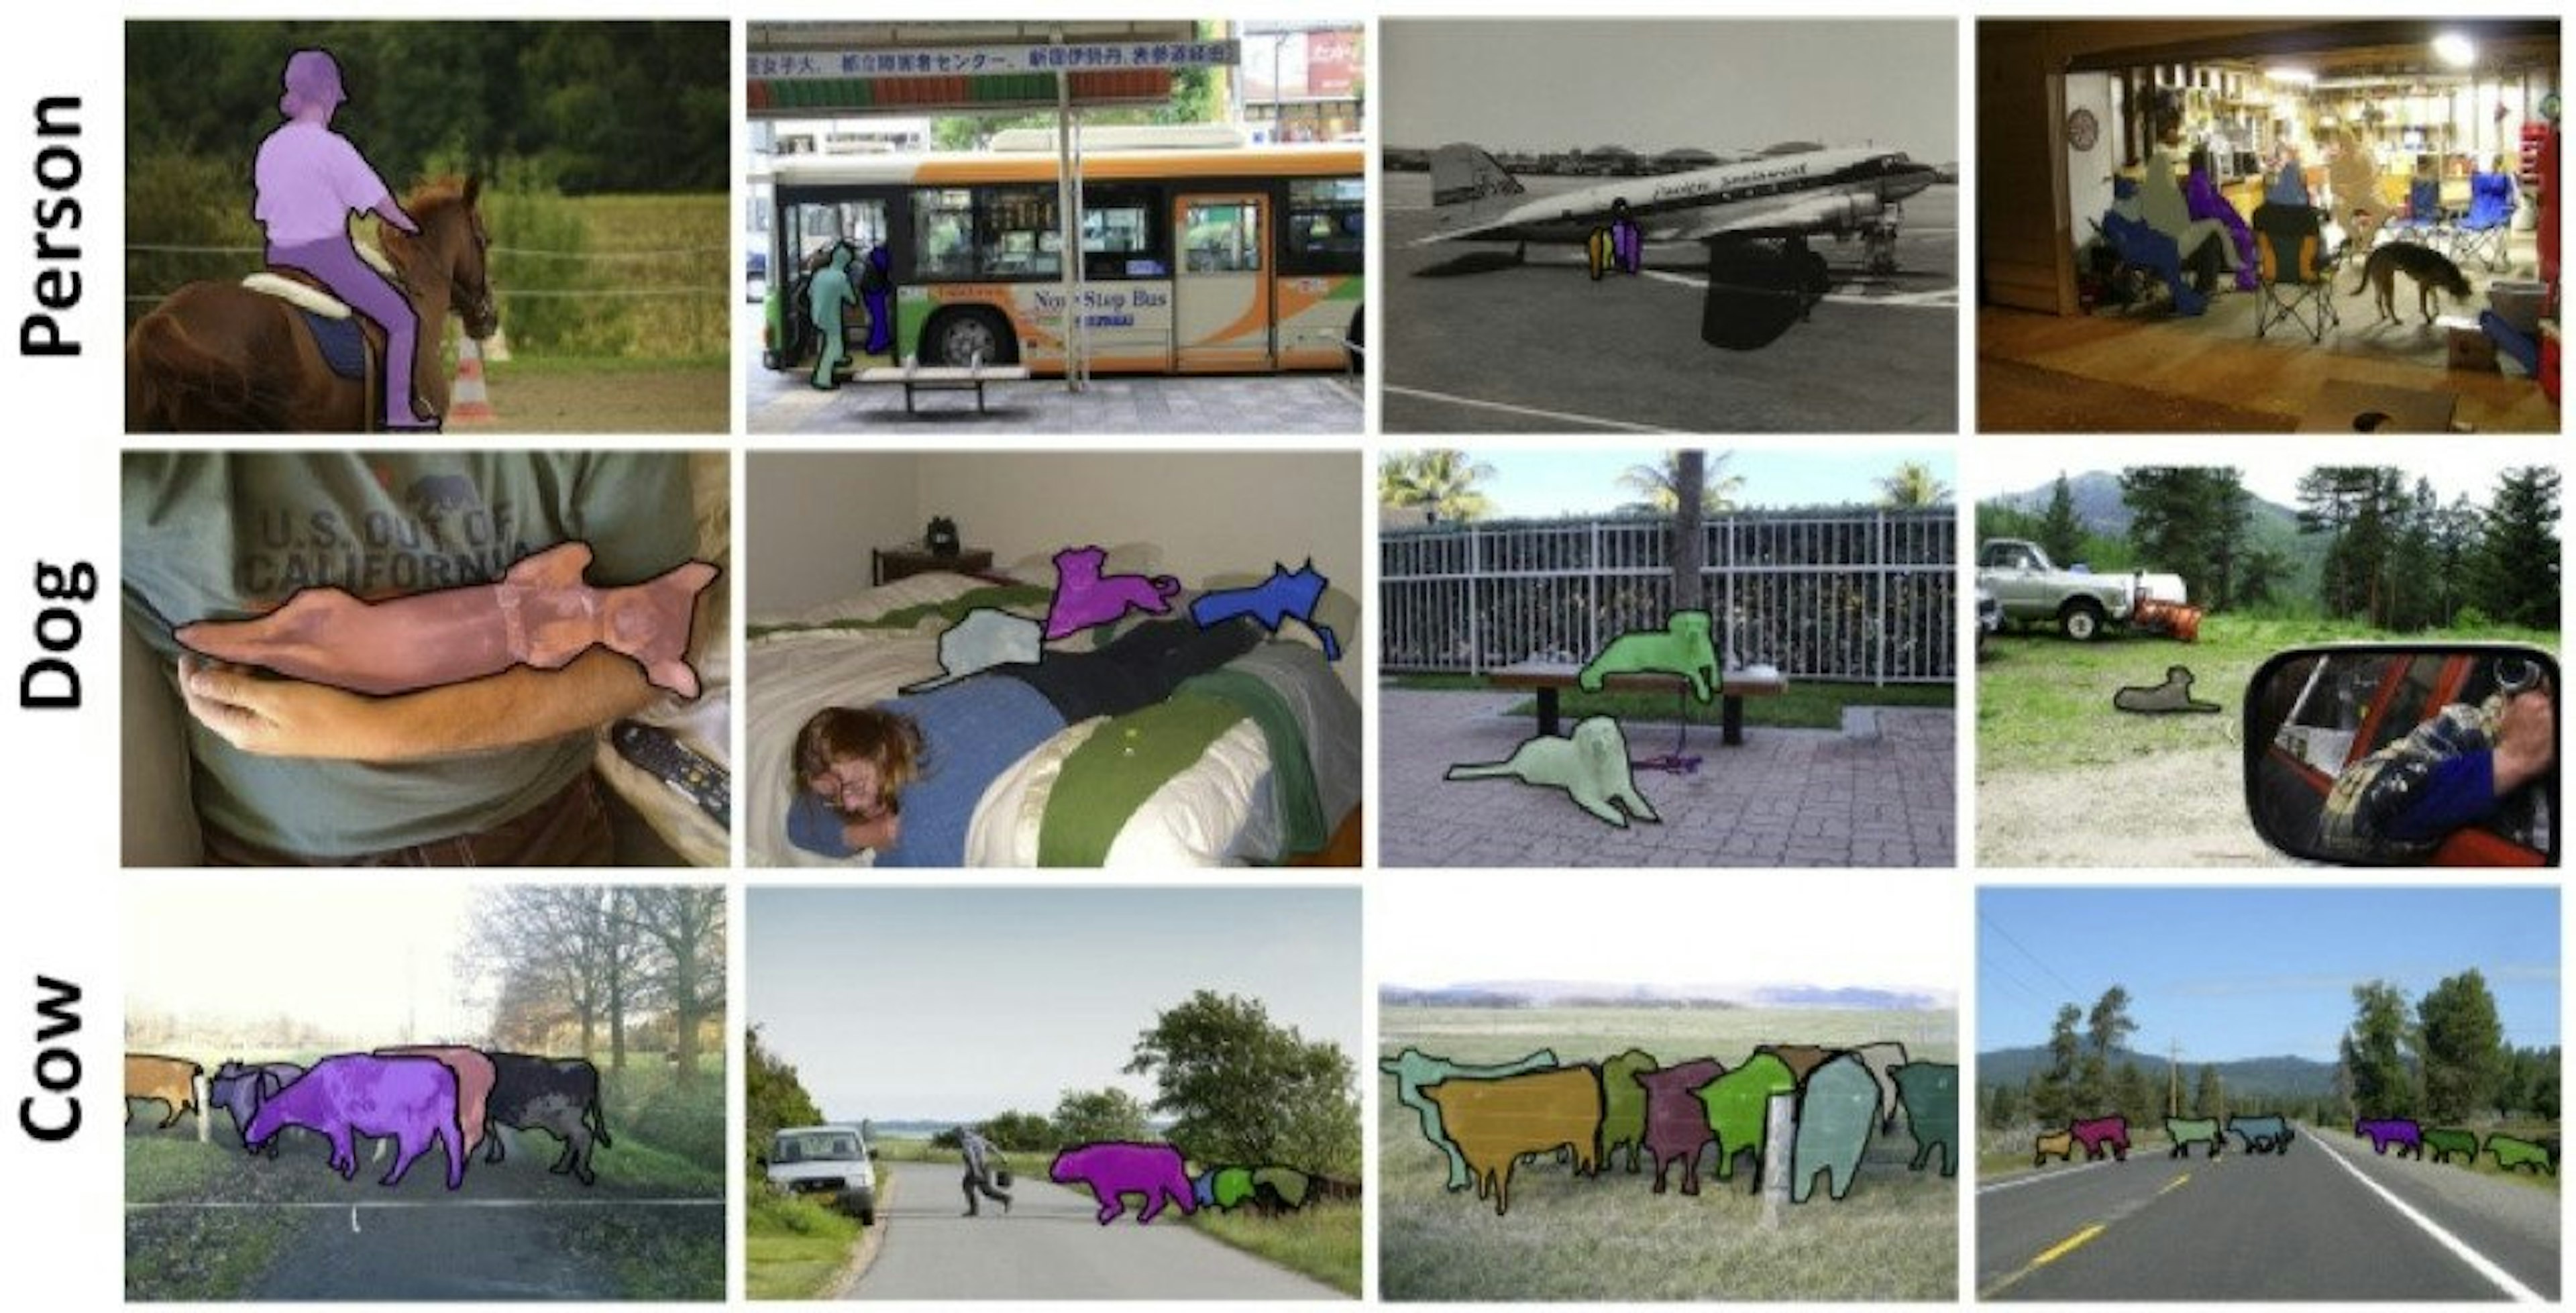 Examples of annotated images from the COCO dataset